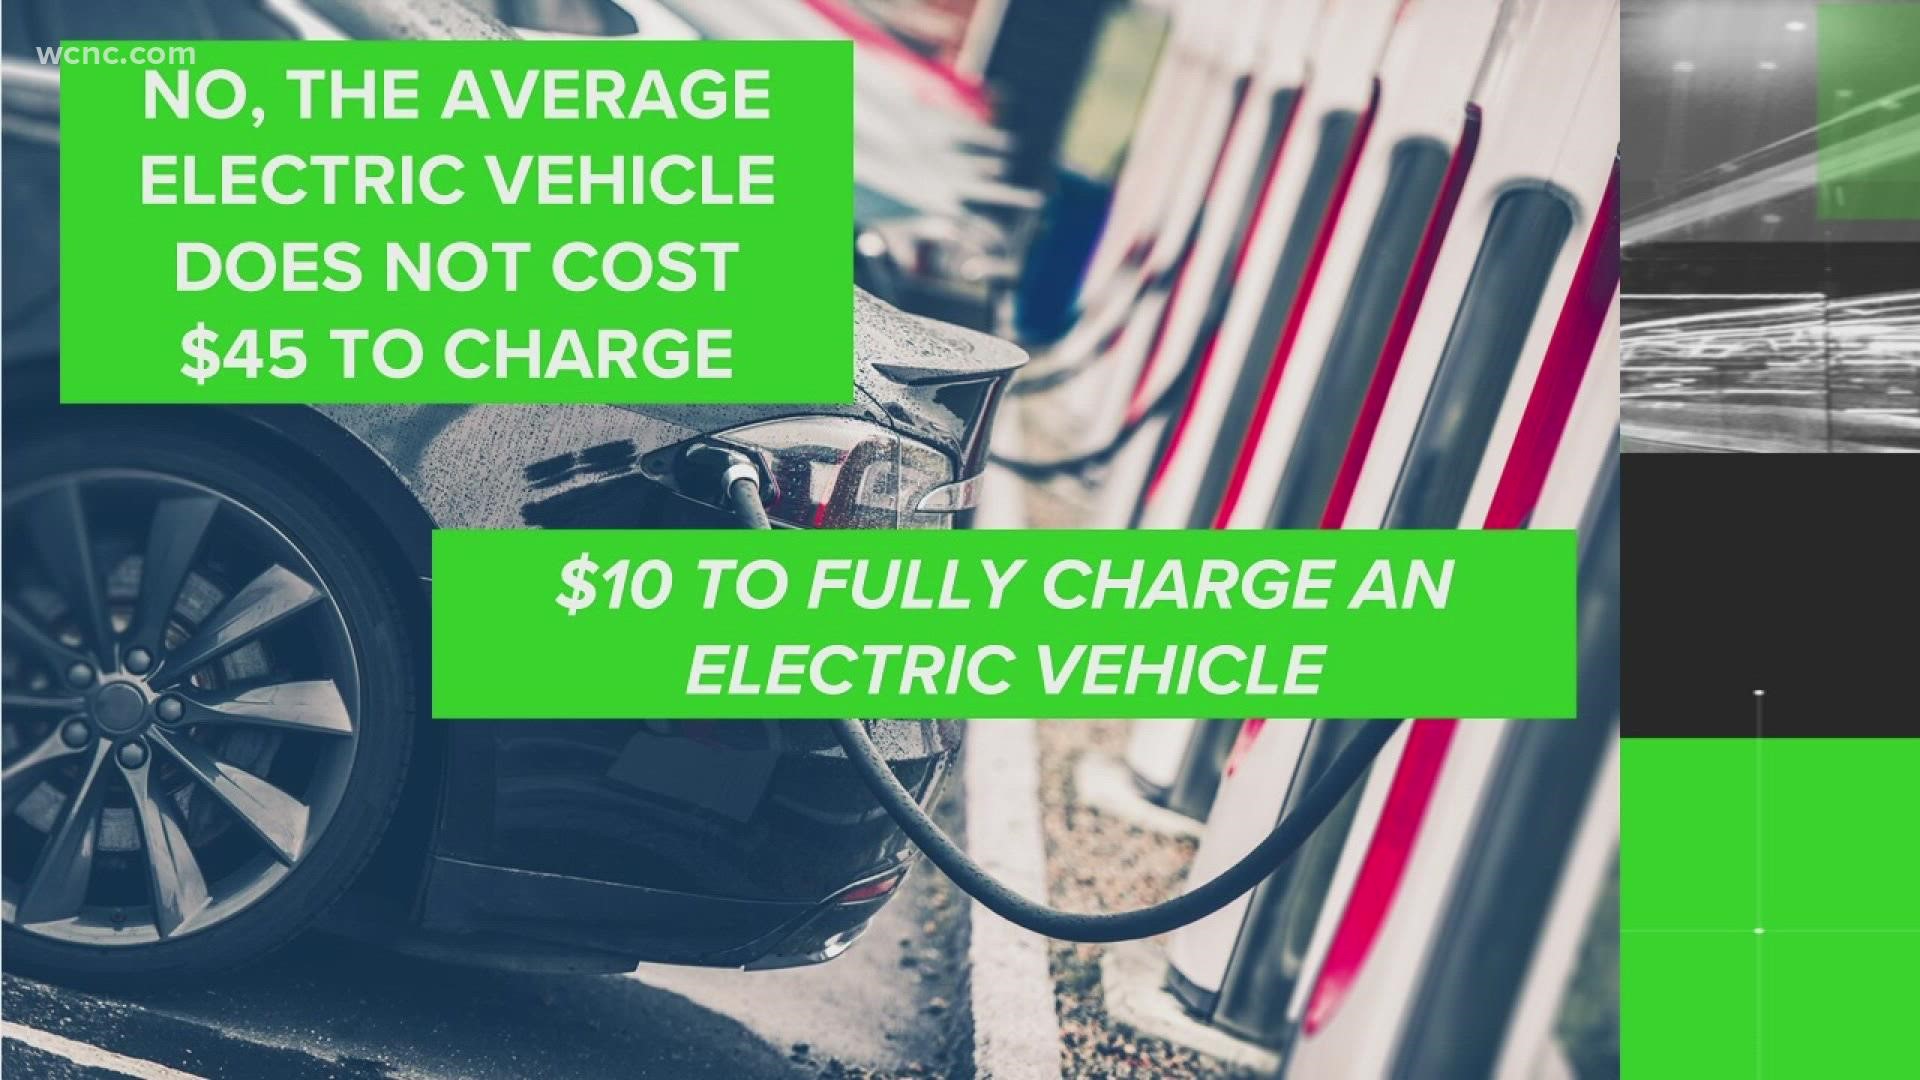 The U.S. Department of Energy (DOE) estimates the average electric vehicle has a 66-kilowatt-hour battery and can go about 200 miles per full charge.